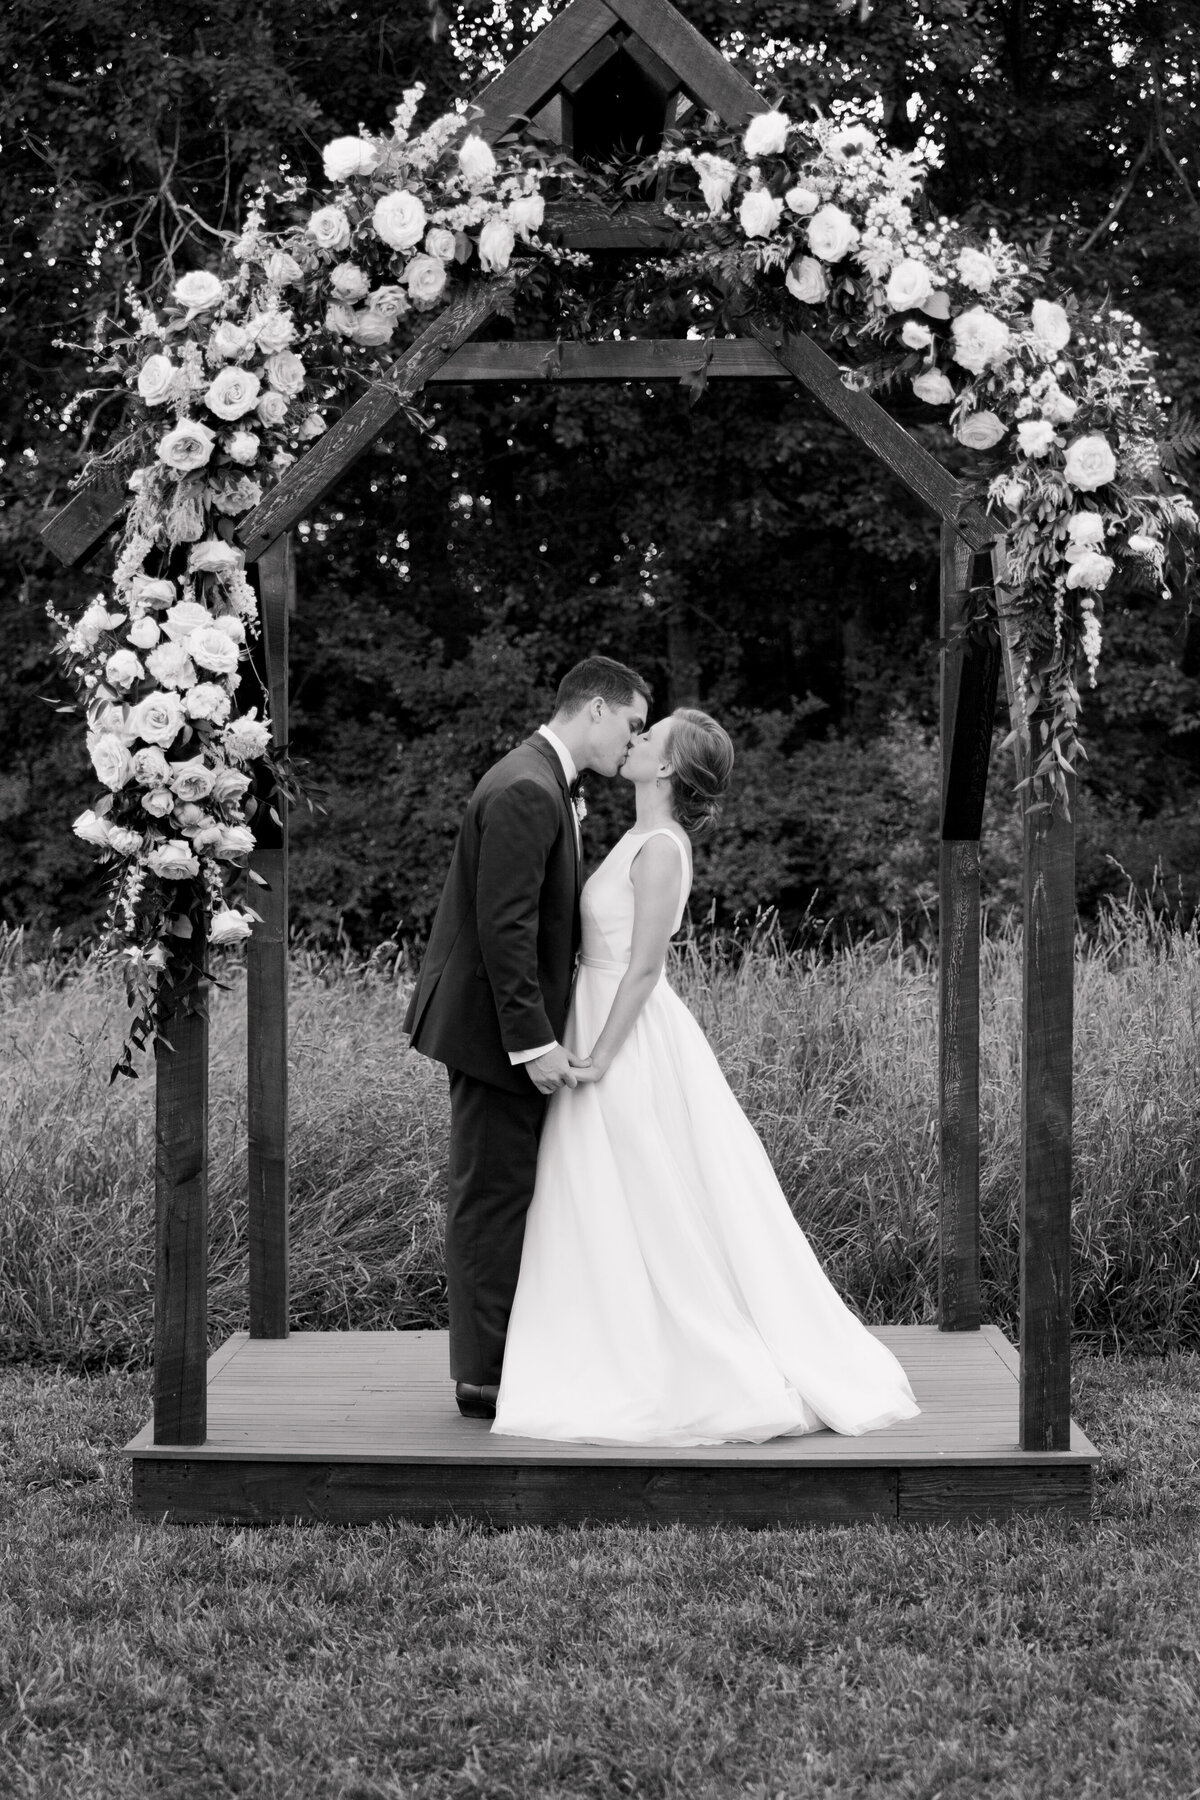 Black and white photo of bride and groom kissing underneath an arch decorated with flowers